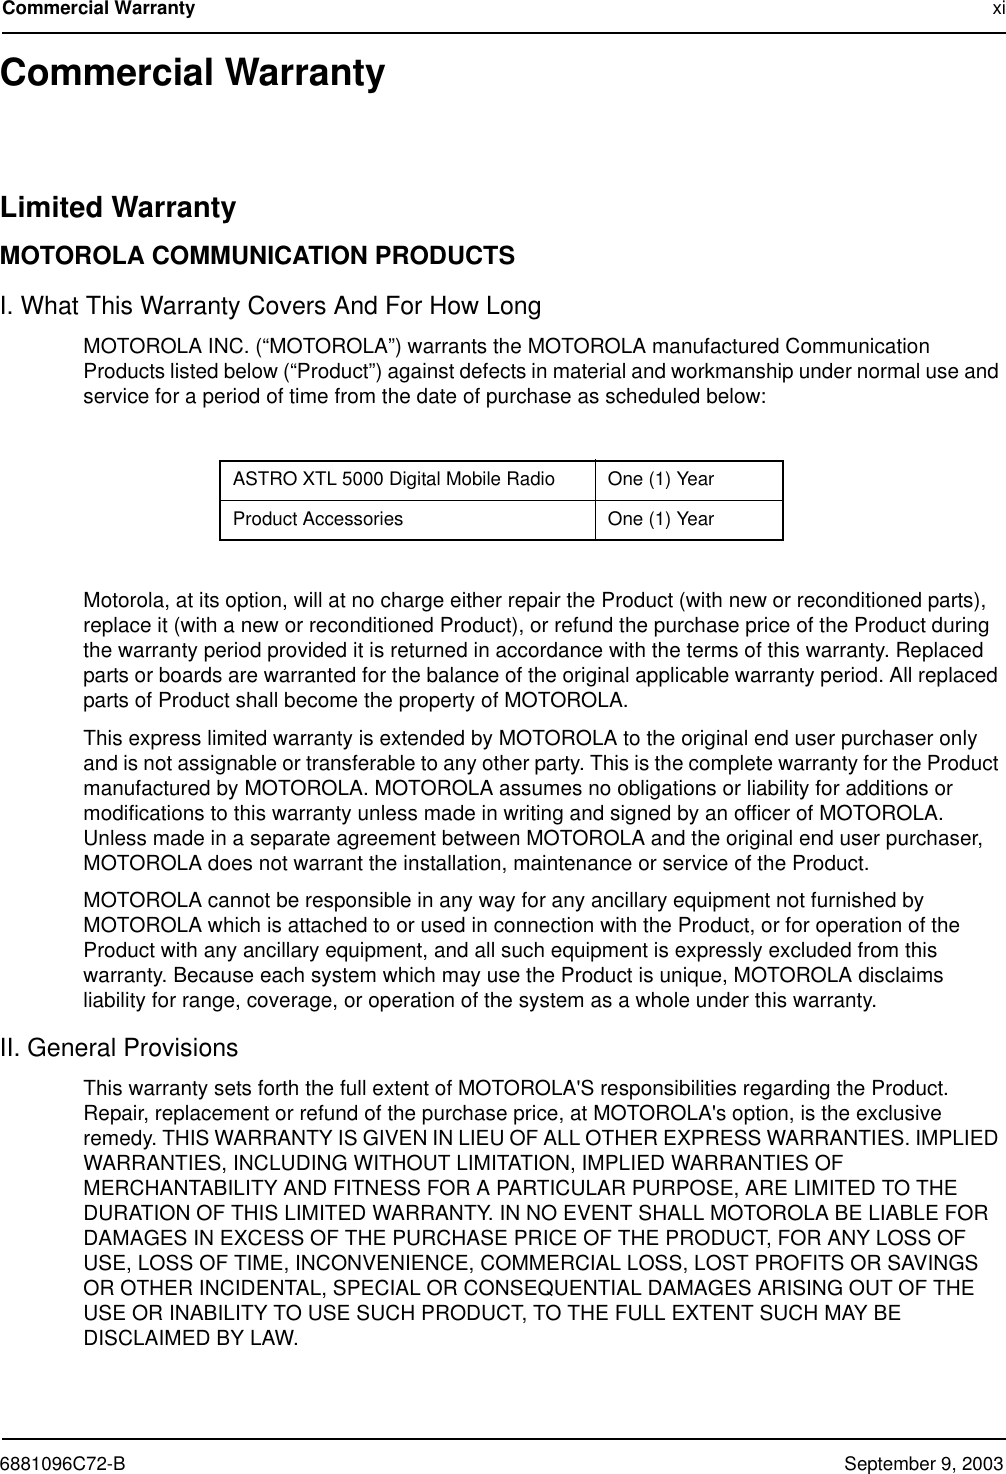 6881096C72-B September 9, 2003Commercial Warranty xiCommercial WarrantyLimited WarrantyMOTOROLA COMMUNICATION PRODUCTSI. What This Warranty Covers And For How LongMOTOROLA INC. (“MOTOROLA”) warrants the MOTOROLA manufactured Communication Products listed below (“Product”) against defects in material and workmanship under normal use and service for a period of time from the date of purchase as scheduled below:Motorola, at its option, will at no charge either repair the Product (with new or reconditioned parts), replace it (with a new or reconditioned Product), or refund the purchase price of the Product during the warranty period provided it is returned in accordance with the terms of this warranty. Replaced parts or boards are warranted for the balance of the original applicable warranty period. All replaced parts of Product shall become the property of MOTOROLA.This express limited warranty is extended by MOTOROLA to the original end user purchaser only and is not assignable or transferable to any other party. This is the complete warranty for the Product manufactured by MOTOROLA. MOTOROLA assumes no obligations or liability for additions or modifications to this warranty unless made in writing and signed by an officer of MOTOROLA. Unless made in a separate agreement between MOTOROLA and the original end user purchaser, MOTOROLA does not warrant the installation, maintenance or service of the Product.MOTOROLA cannot be responsible in any way for any ancillary equipment not furnished by MOTOROLA which is attached to or used in connection with the Product, or for operation of the Product with any ancillary equipment, and all such equipment is expressly excluded from this warranty. Because each system which may use the Product is unique, MOTOROLA disclaims liability for range, coverage, or operation of the system as a whole under this warranty.II. General ProvisionsThis warranty sets forth the full extent of MOTOROLA&apos;S responsibilities regarding the Product. Repair, replacement or refund of the purchase price, at MOTOROLA&apos;s option, is the exclusive remedy. THIS WARRANTY IS GIVEN IN LIEU OF ALL OTHER EXPRESS WARRANTIES. IMPLIED WARRANTIES, INCLUDING WITHOUT LIMITATION, IMPLIED WARRANTIES OF MERCHANTABILITY AND FITNESS FOR A PARTICULAR PURPOSE, ARE LIMITED TO THE DURATION OF THIS LIMITED WARRANTY. IN NO EVENT SHALL MOTOROLA BE LIABLE FOR DAMAGES IN EXCESS OF THE PURCHASE PRICE OF THE PRODUCT, FOR ANY LOSS OF USE, LOSS OF TIME, INCONVENIENCE, COMMERCIAL LOSS, LOST PROFITS OR SAVINGS OR OTHER INCIDENTAL, SPECIAL OR CONSEQUENTIAL DAMAGES ARISING OUT OF THE USE OR INABILITY TO USE SUCH PRODUCT, TO THE FULL EXTENT SUCH MAY BE DISCLAIMED BY LAW.ASTRO XTL 5000 Digital Mobile Radio One (1) YearProduct Accessories One (1) Year